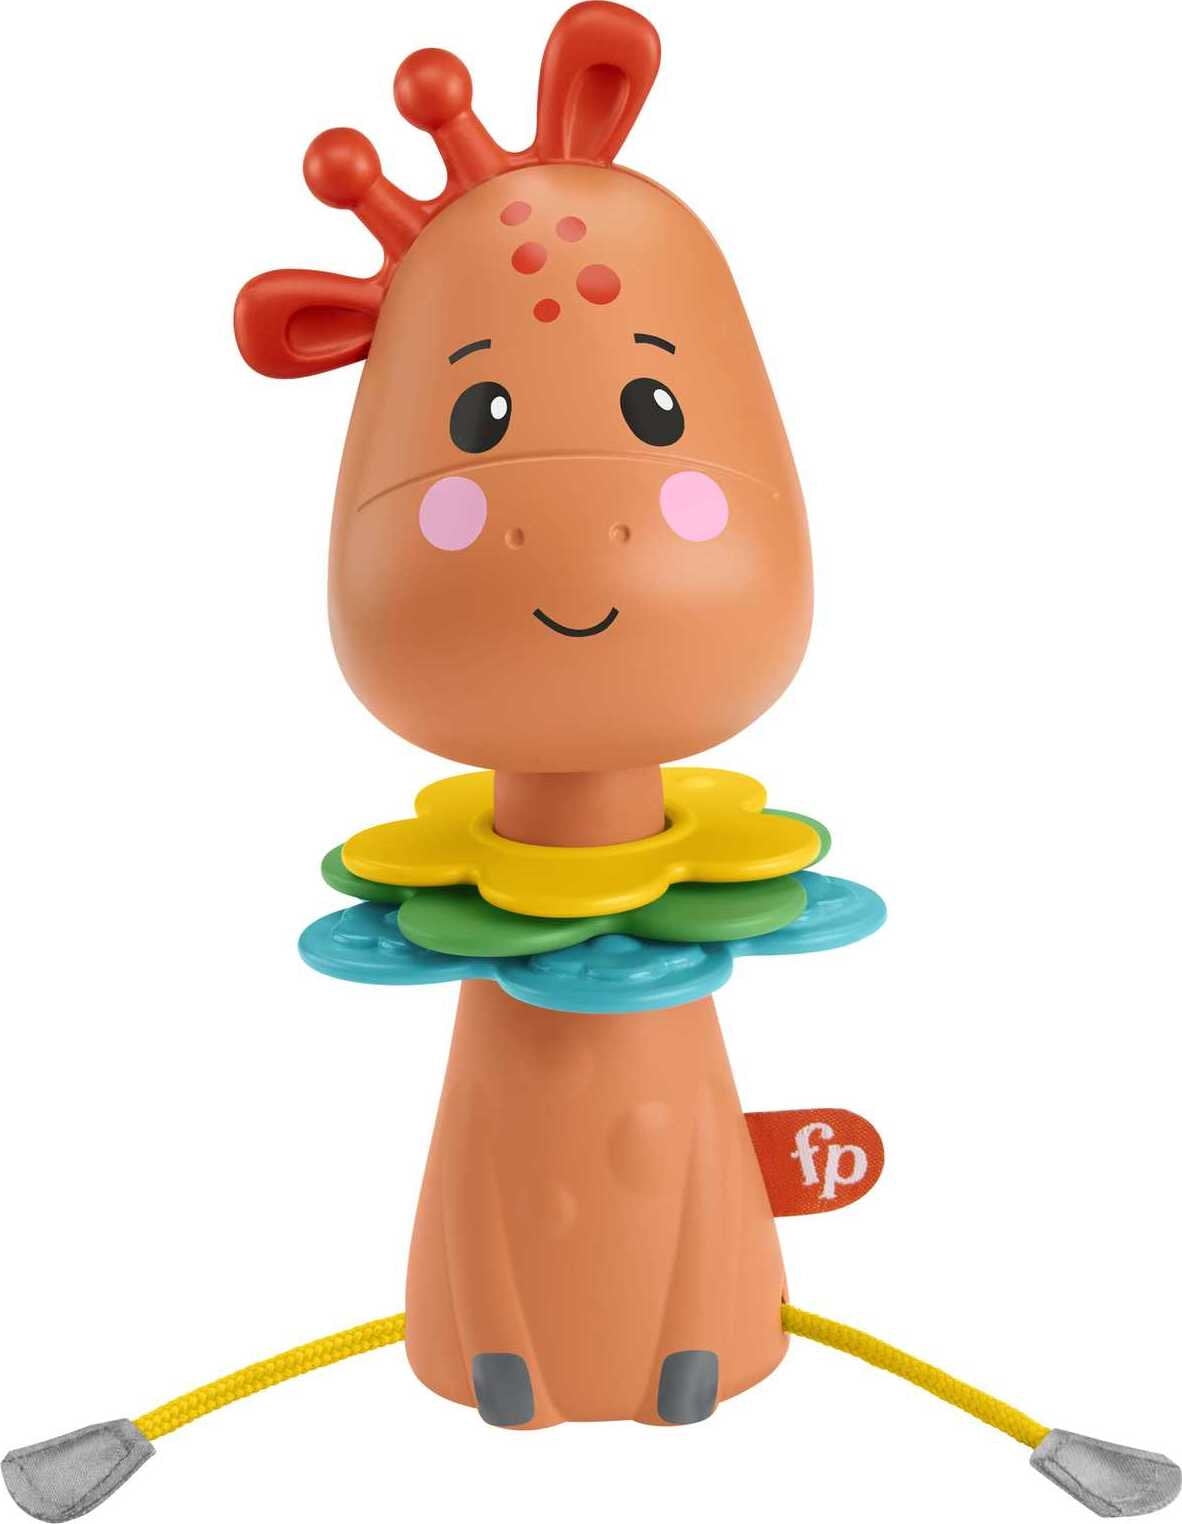 Details about   Fisher Price Activity Giraffe 